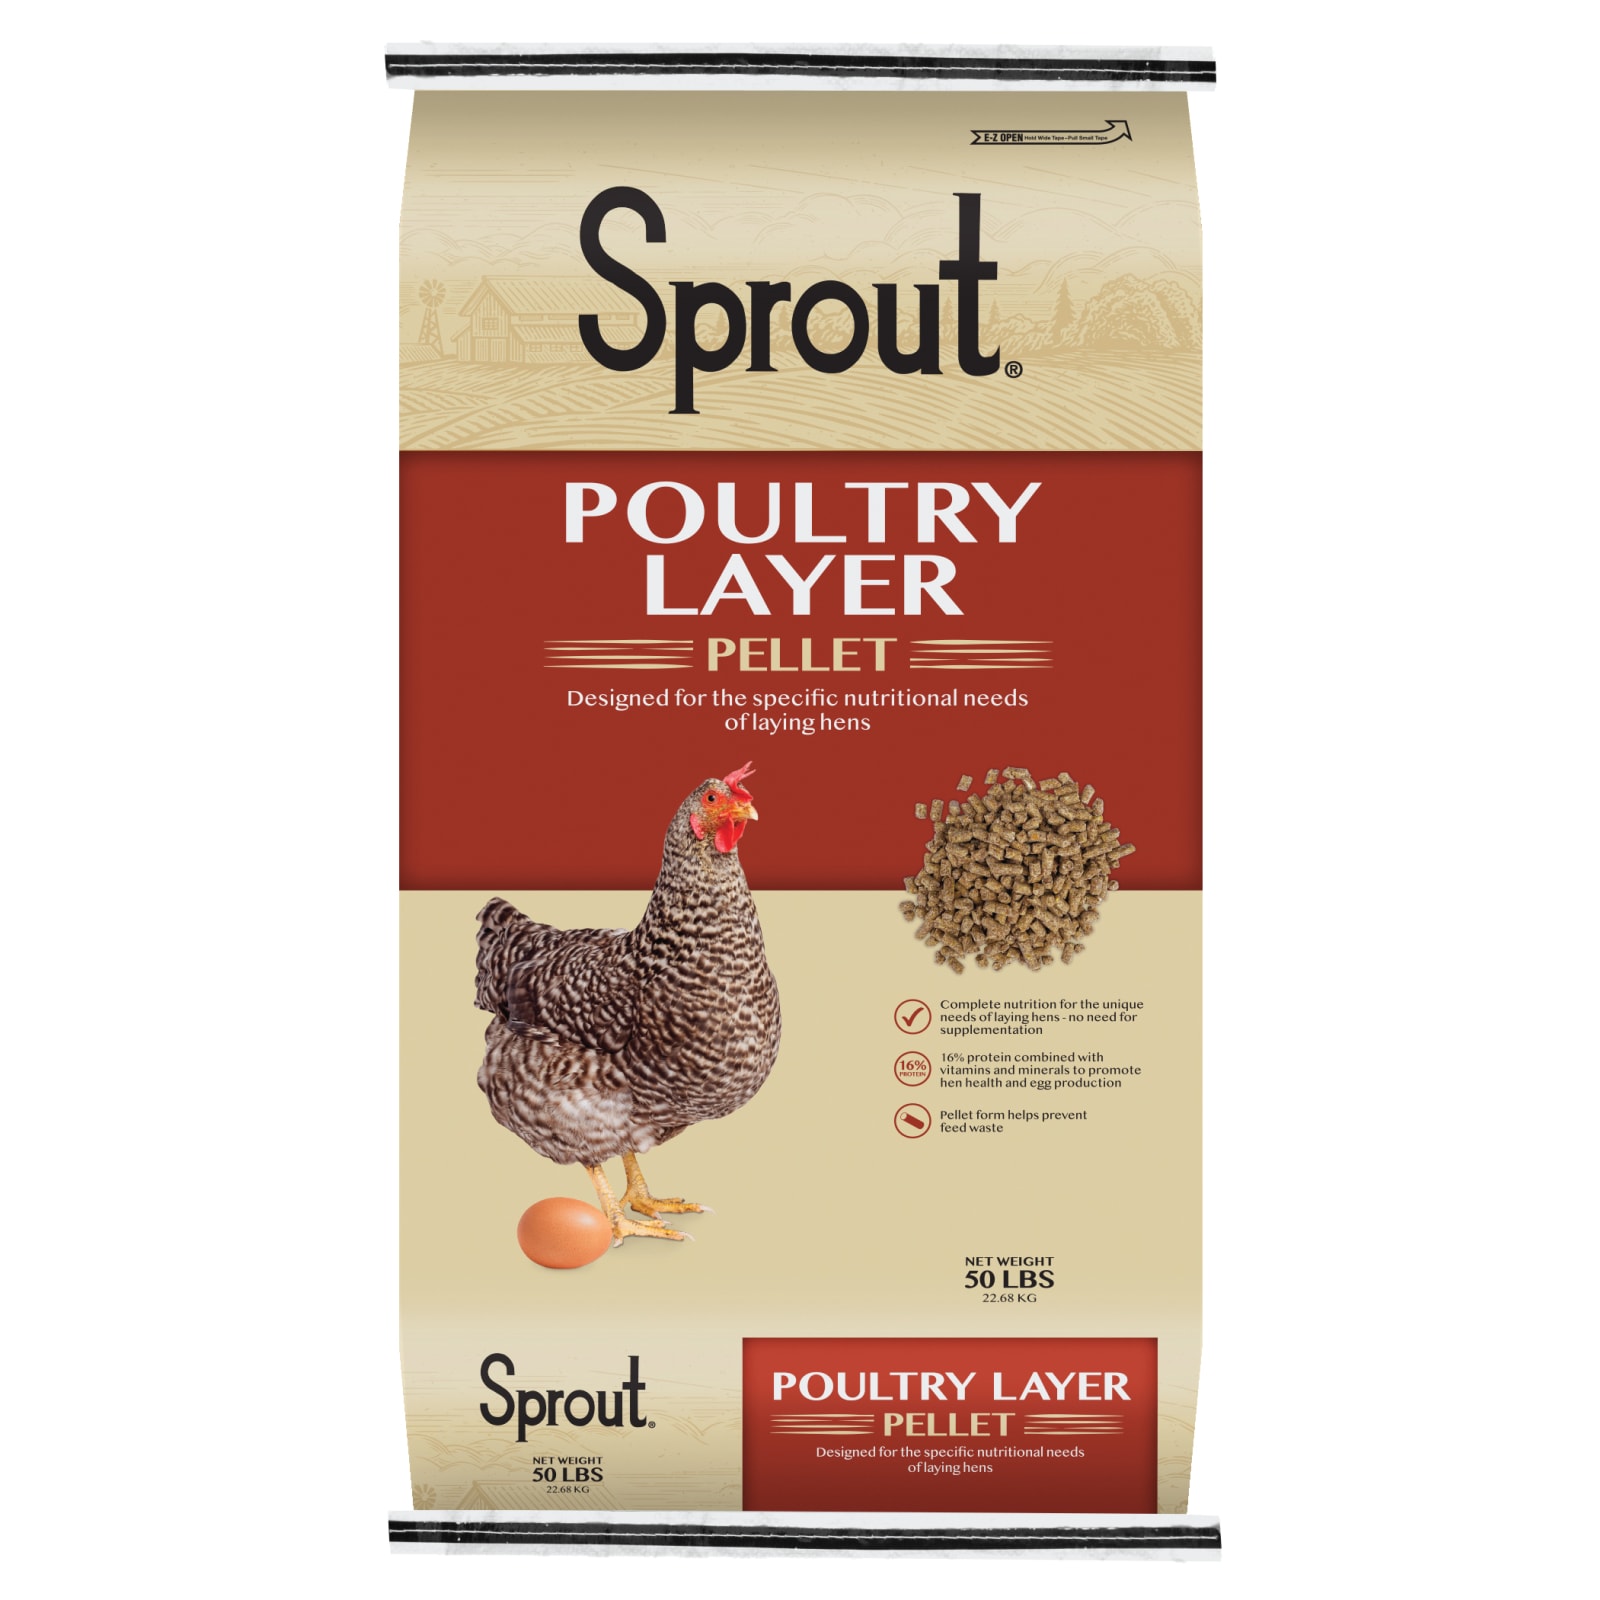 Poultry Layer Pellet Feed 50 lbs by Sprout at Fleet Farm